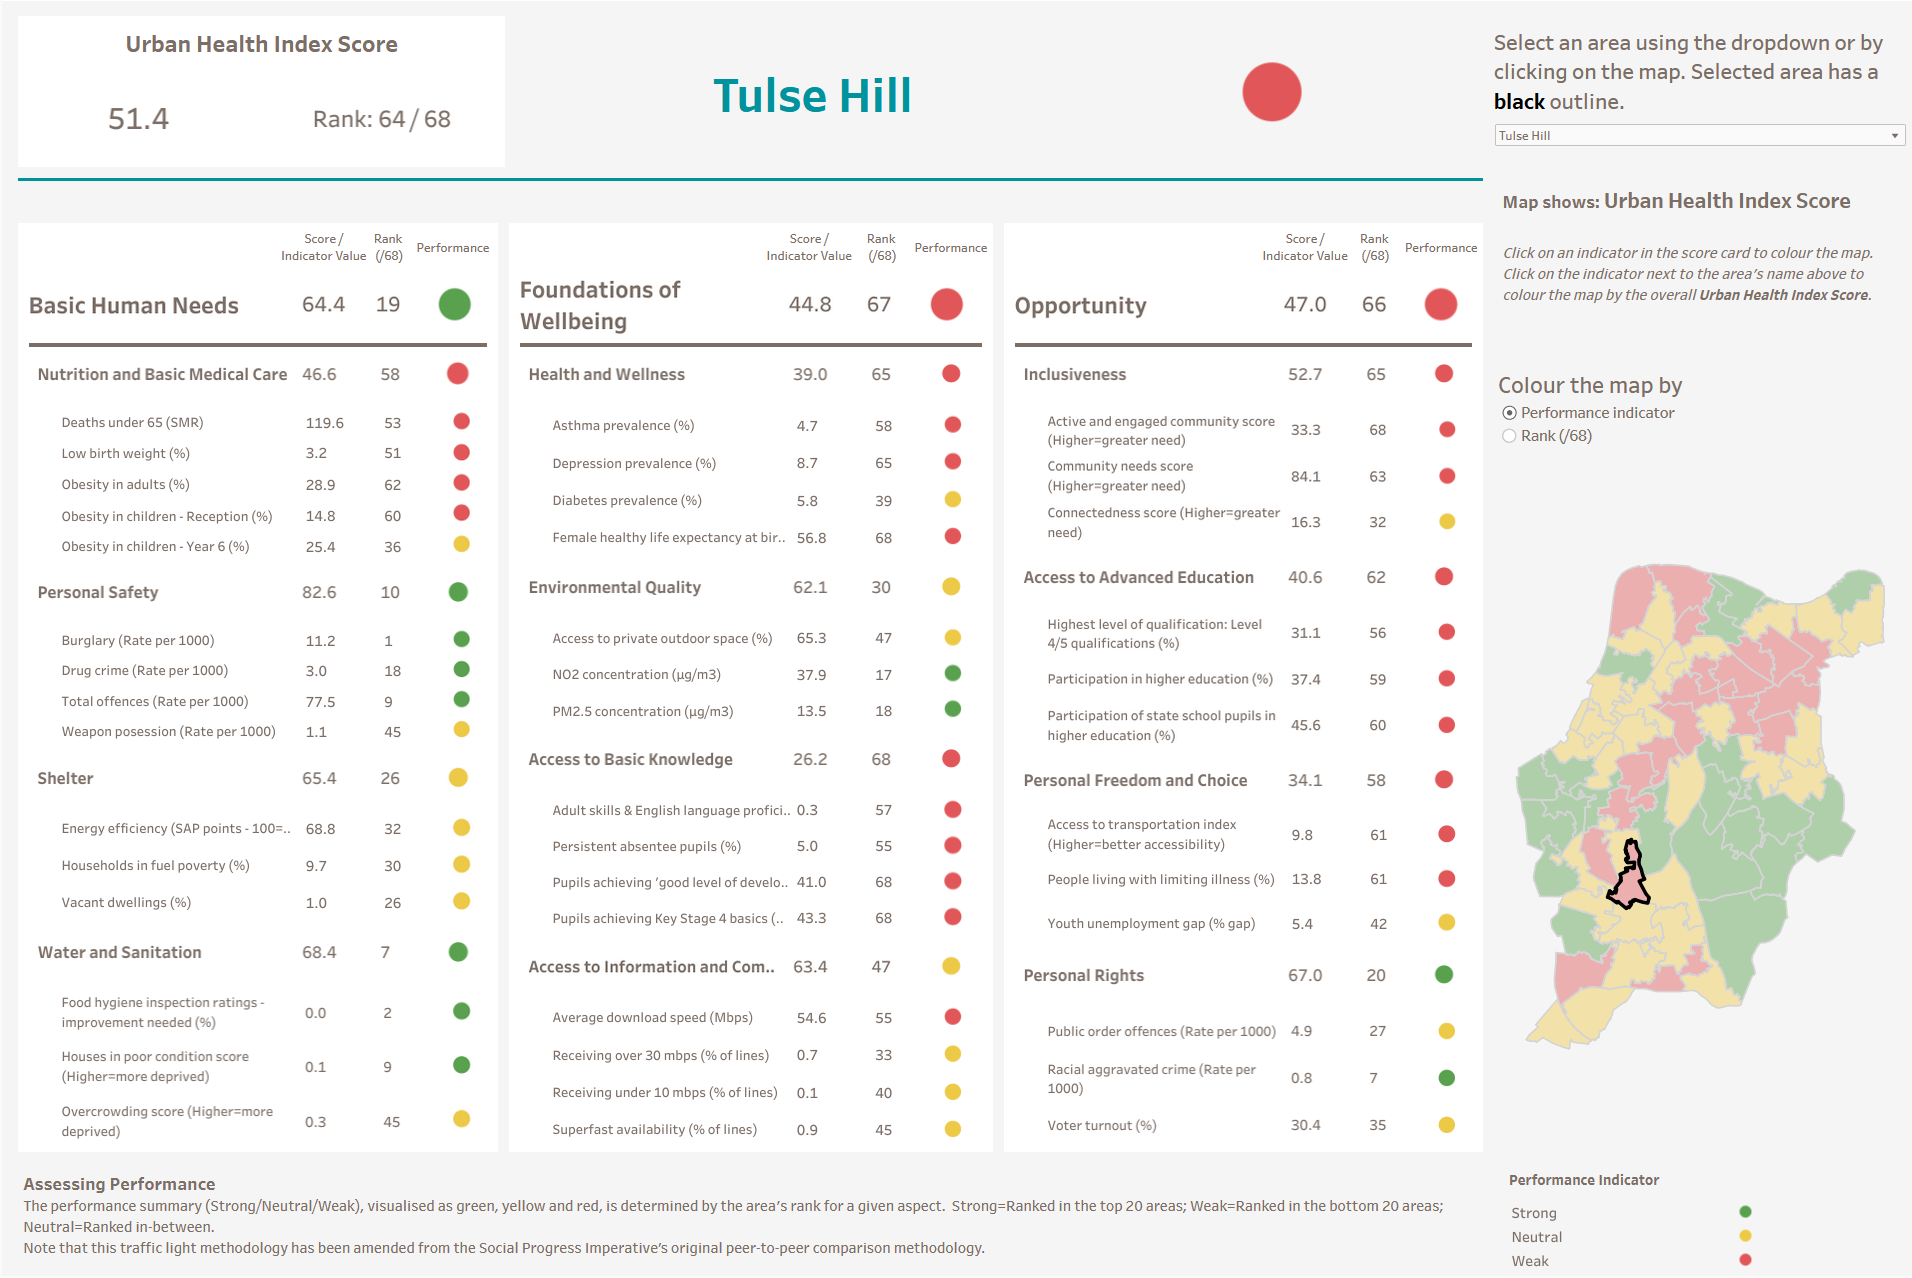 Snapshot of Tulse Hill from our Urban Health Index